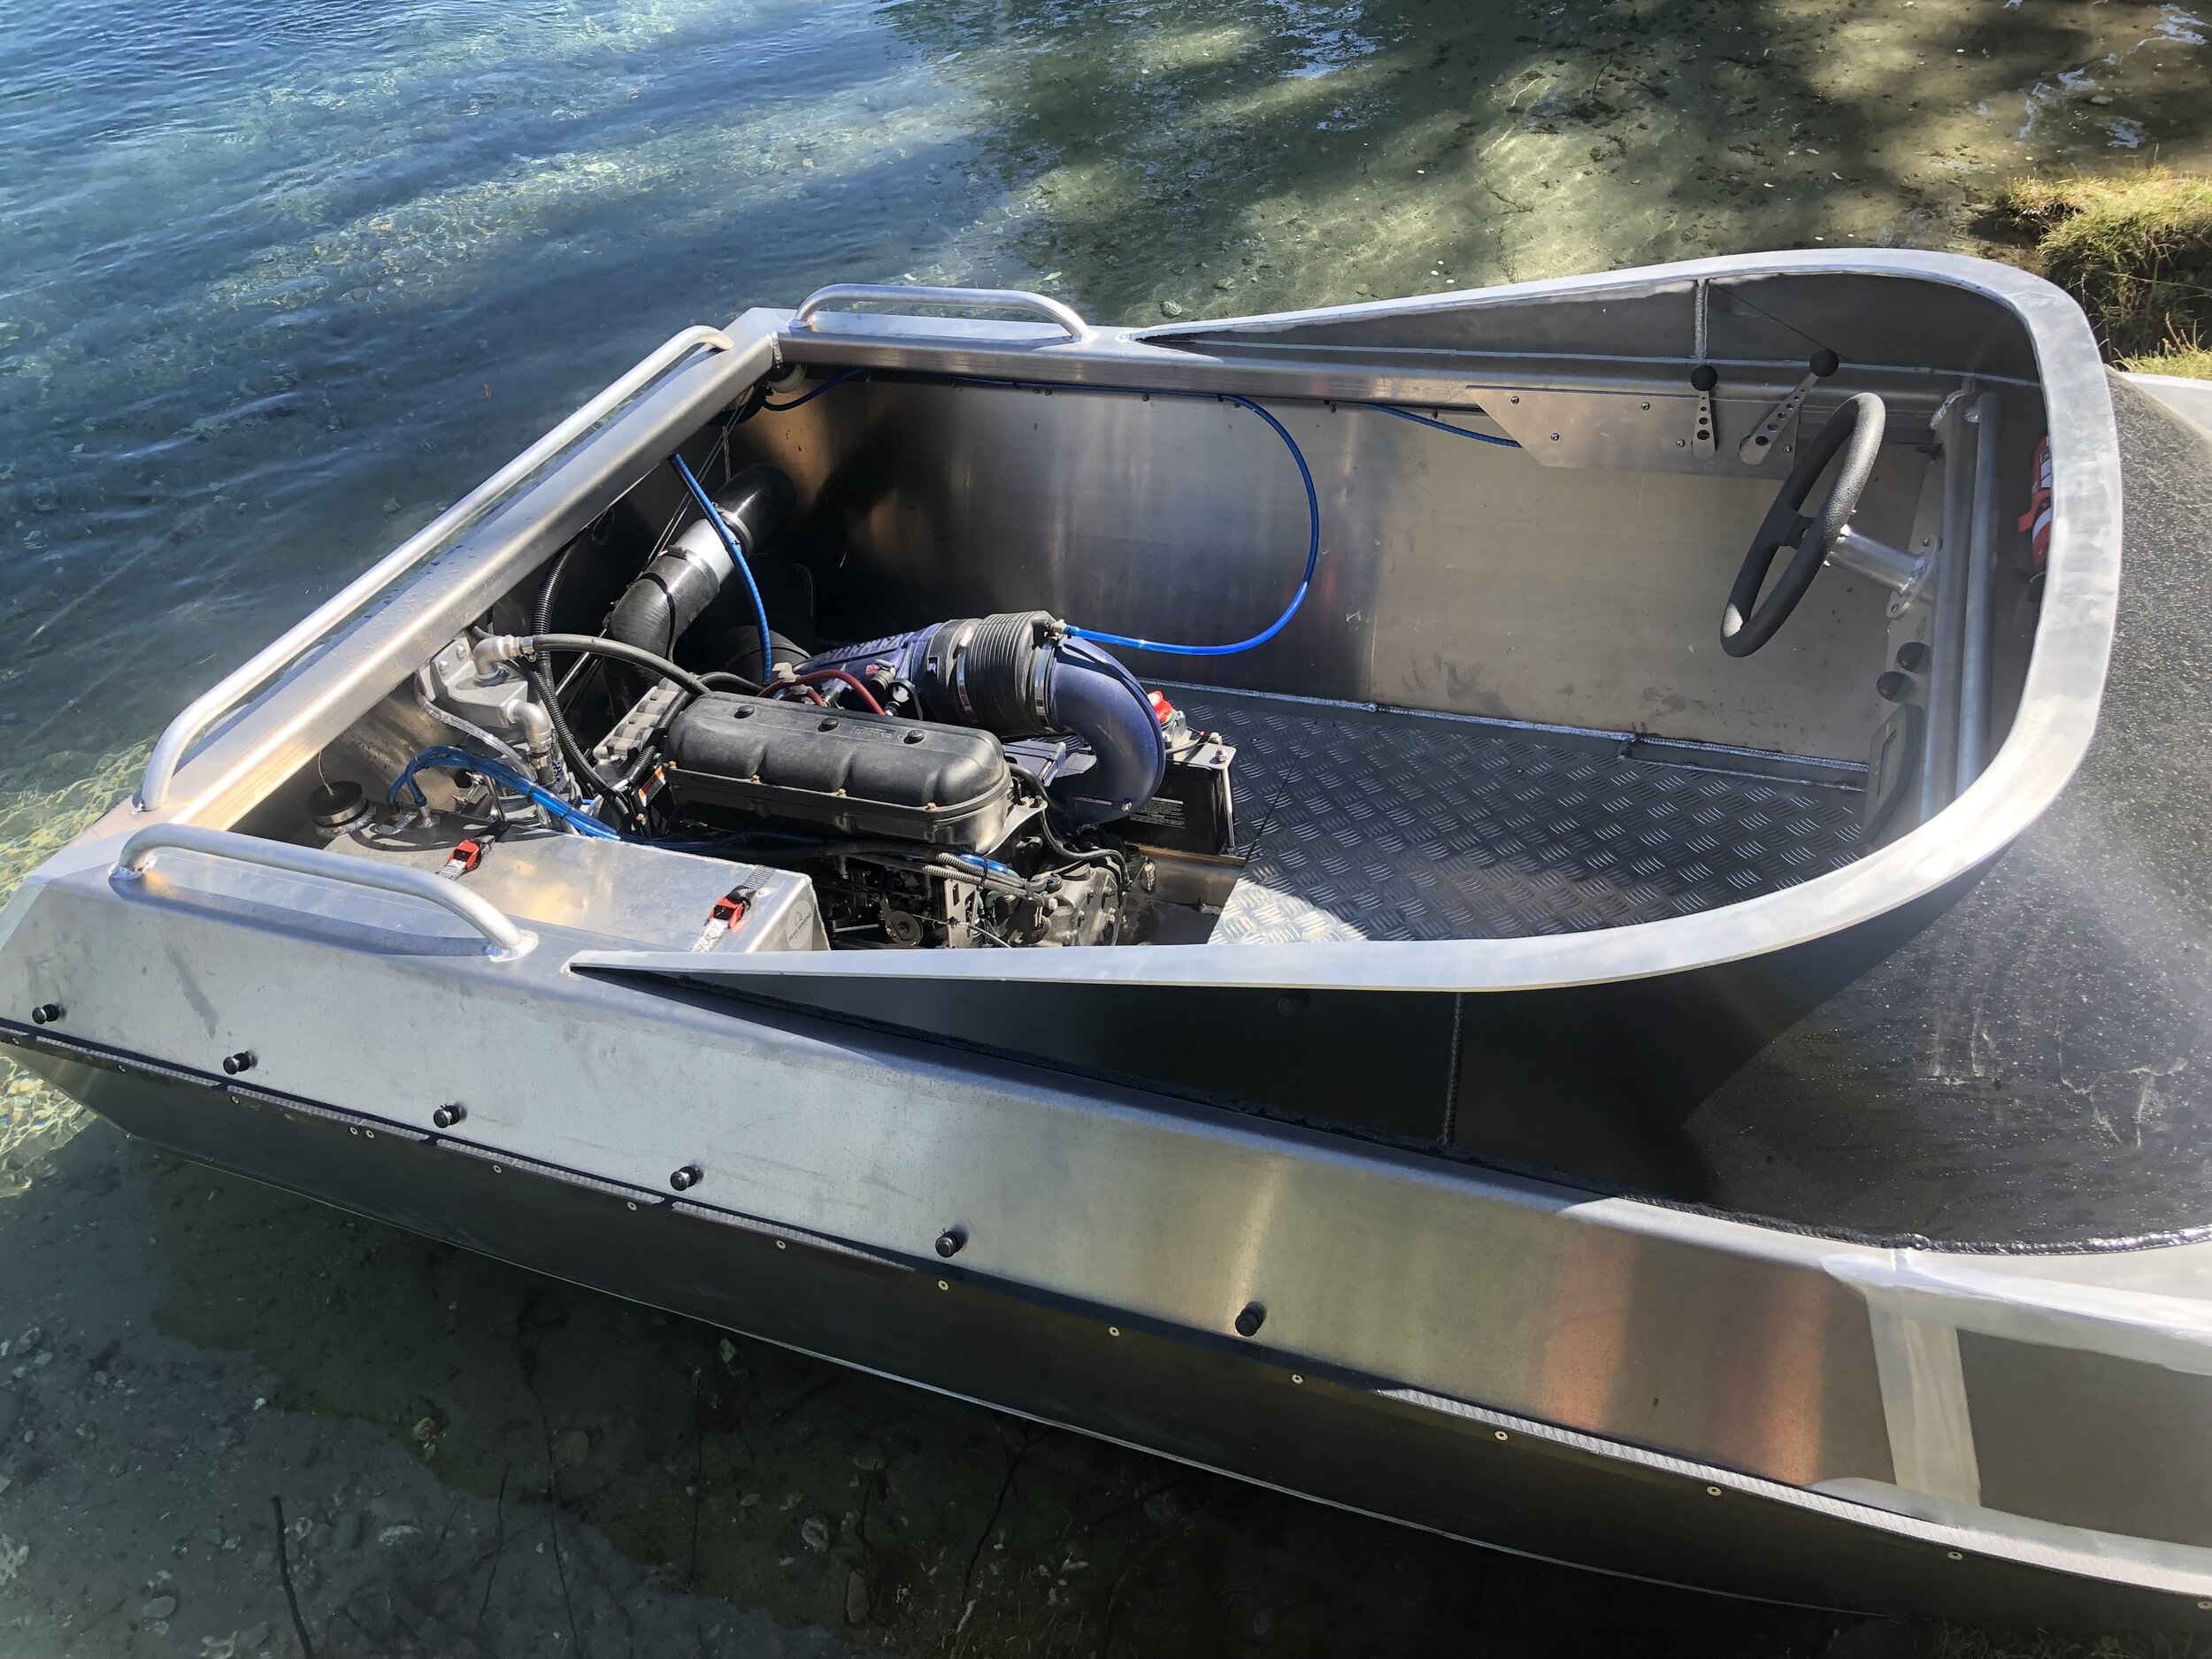 Top mini jet boat engine for sale